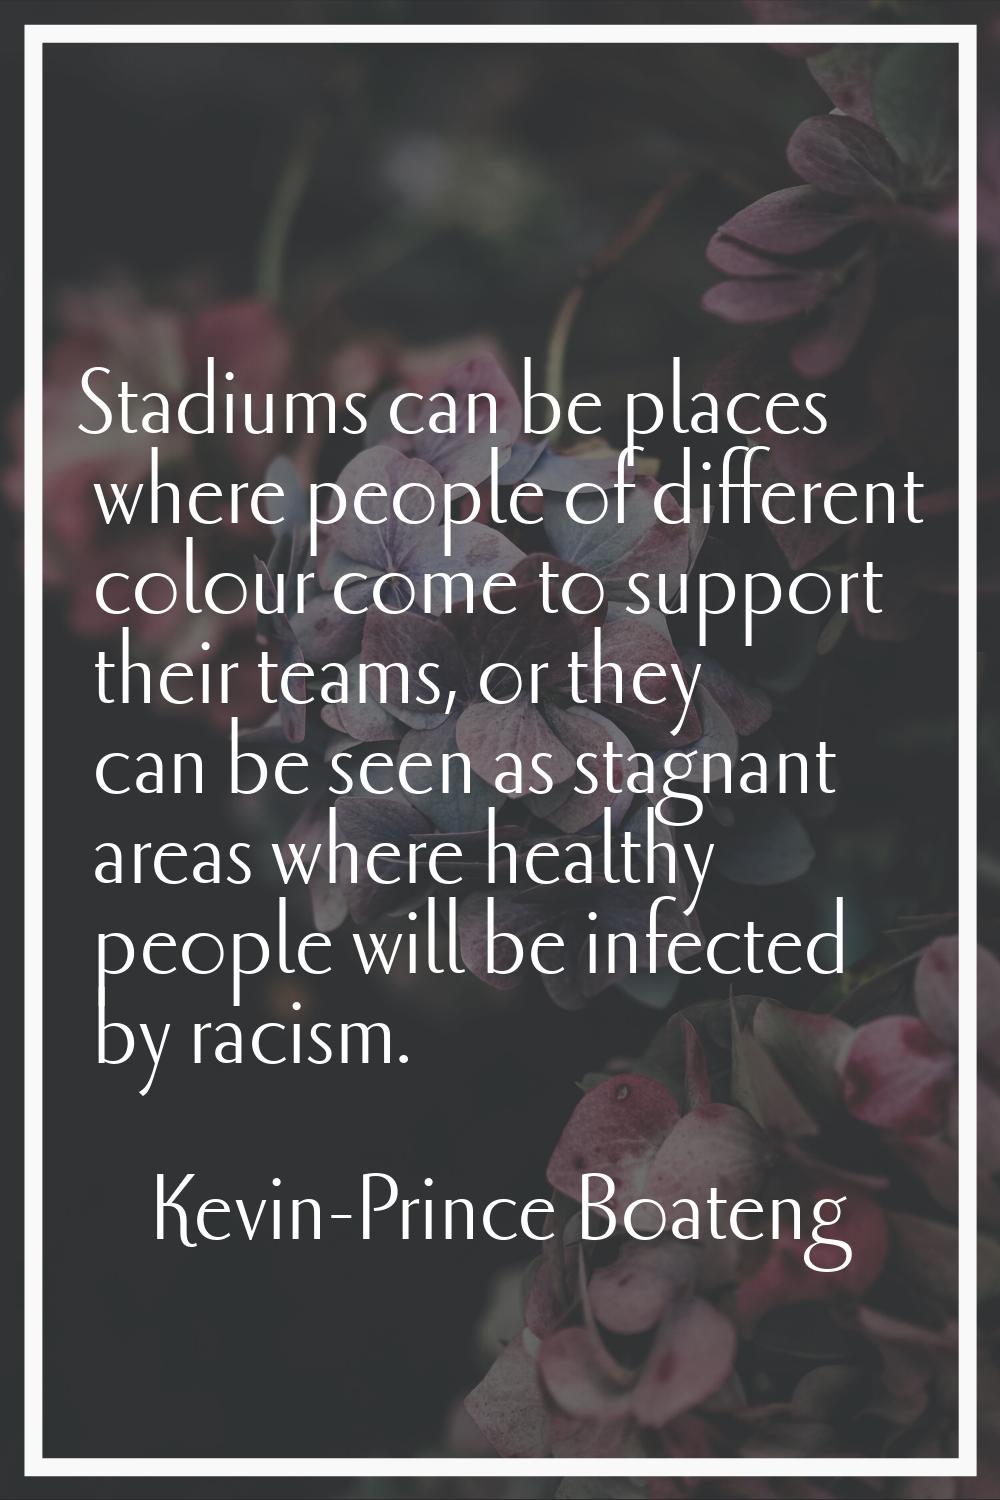 Stadiums can be places where people of different colour come to support their teams, or they can be